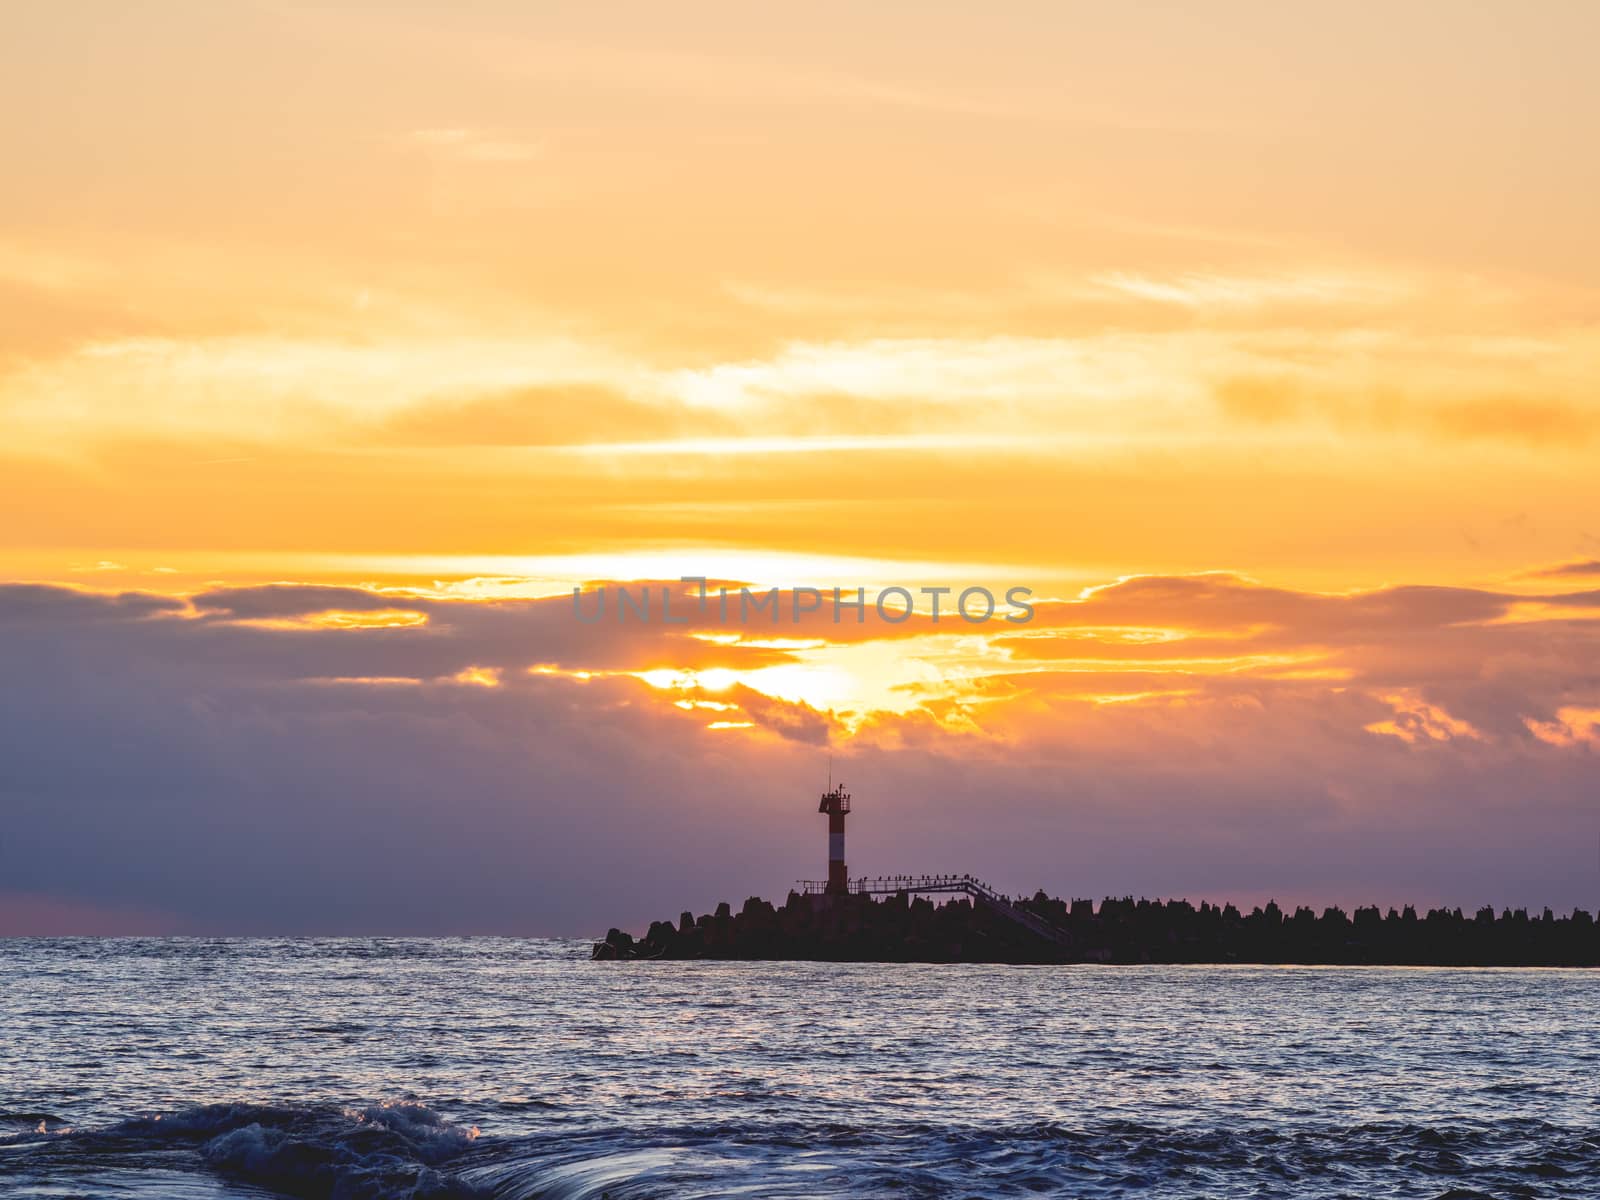 Beautiful sunset over Black sea in Sochi, Russia. Silhouettes of lighthouse and seagulls on the railing. by aksenovko